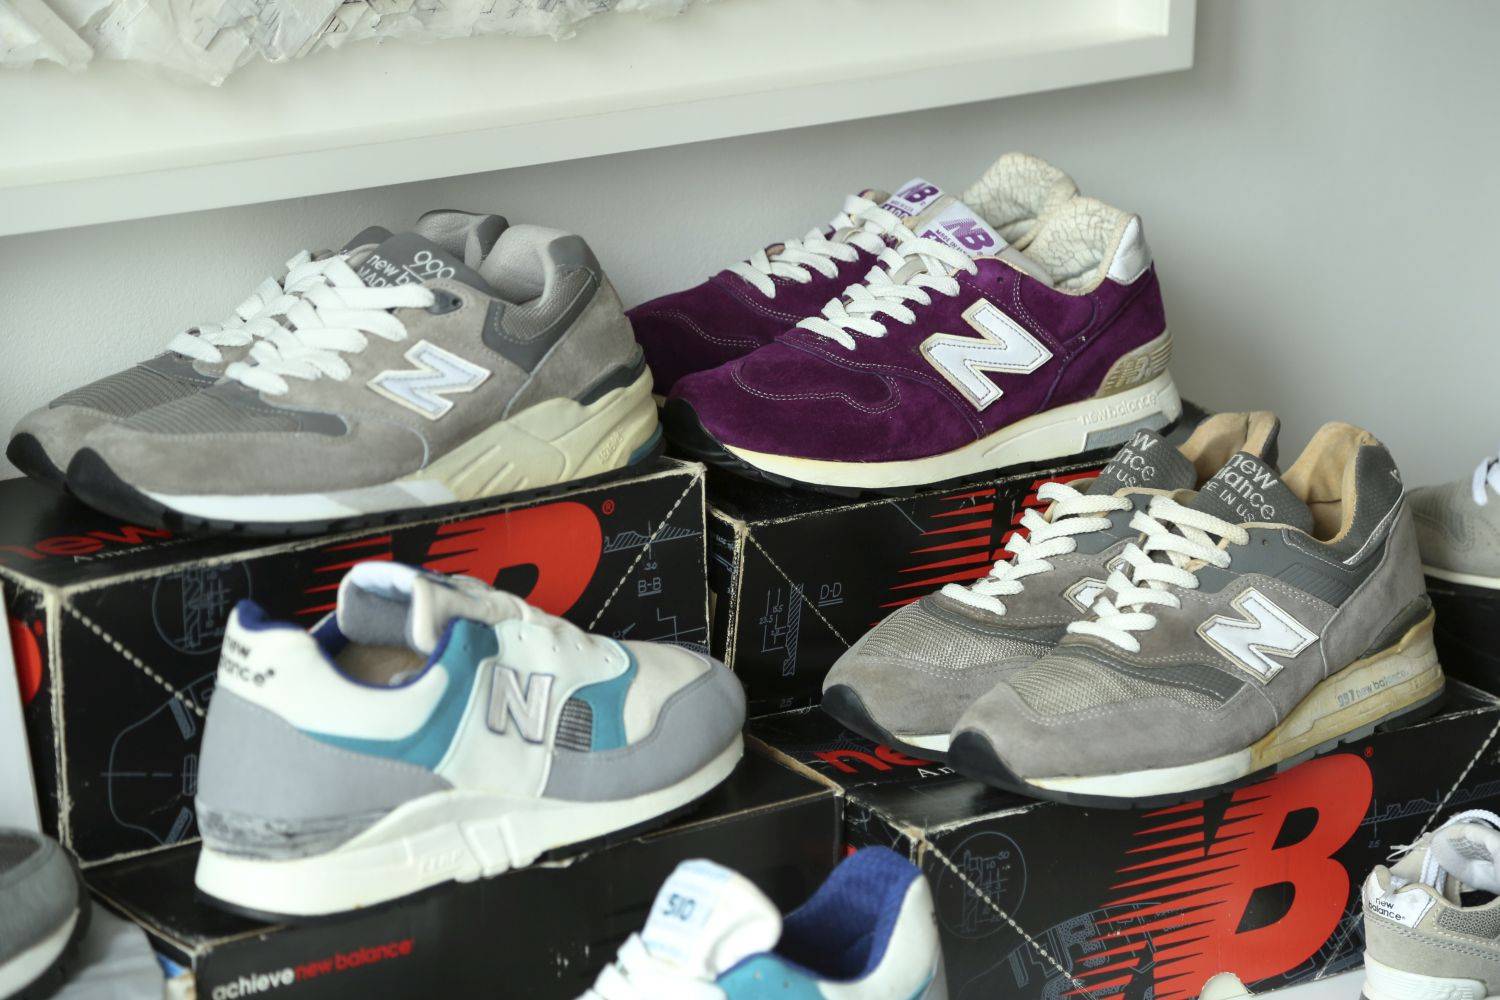 4 new balances from Thomas Dartiques' collection